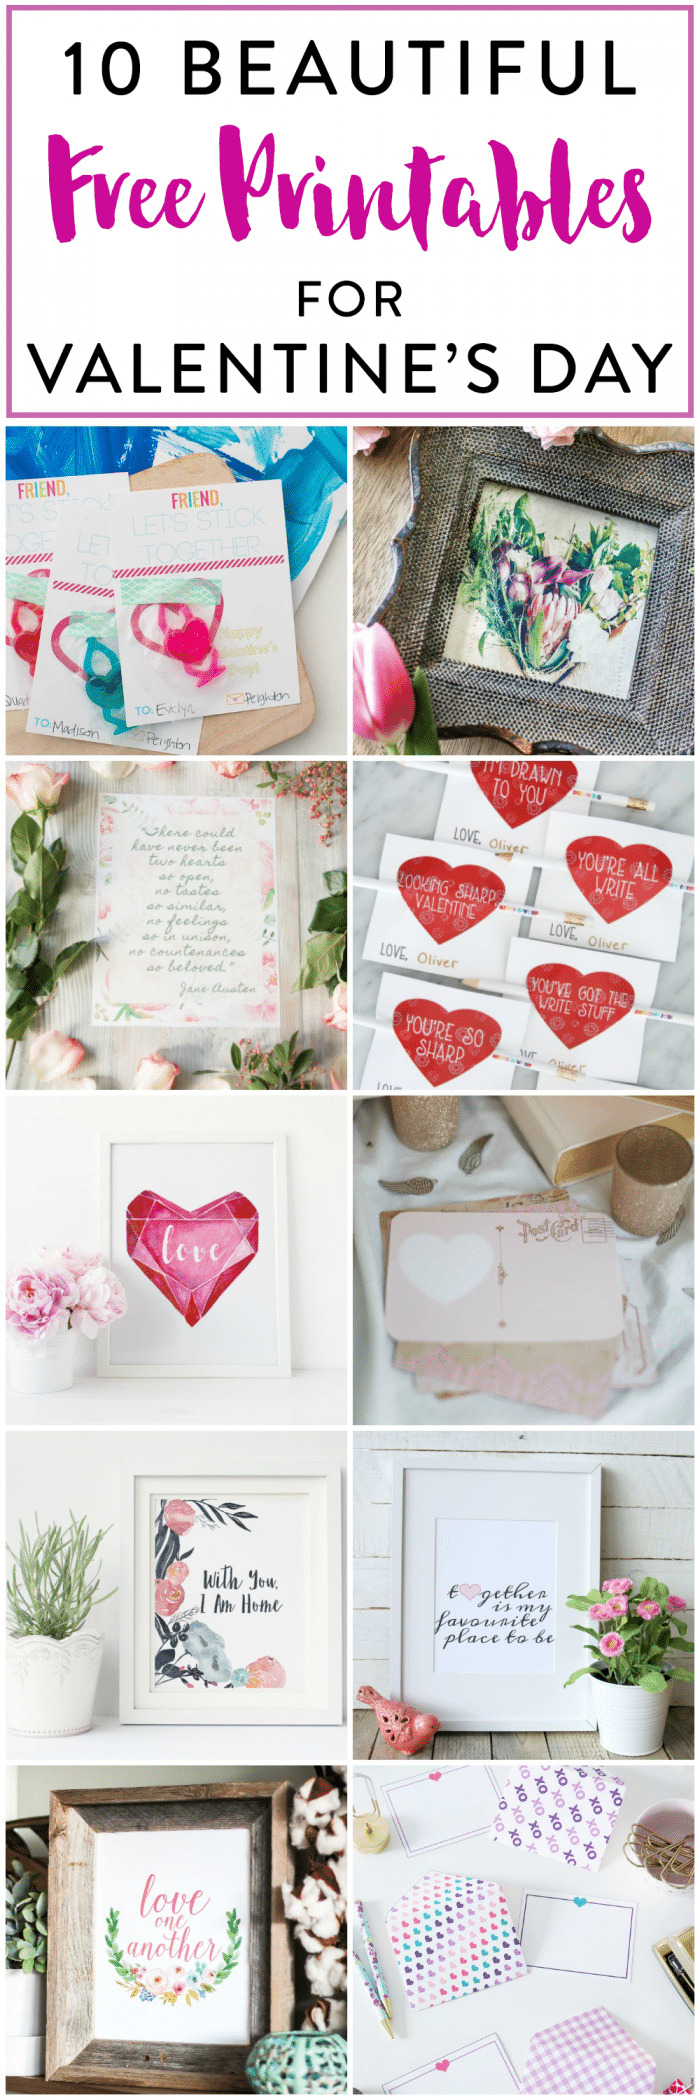 10 Beautiful Free Printables for Valentine's Day